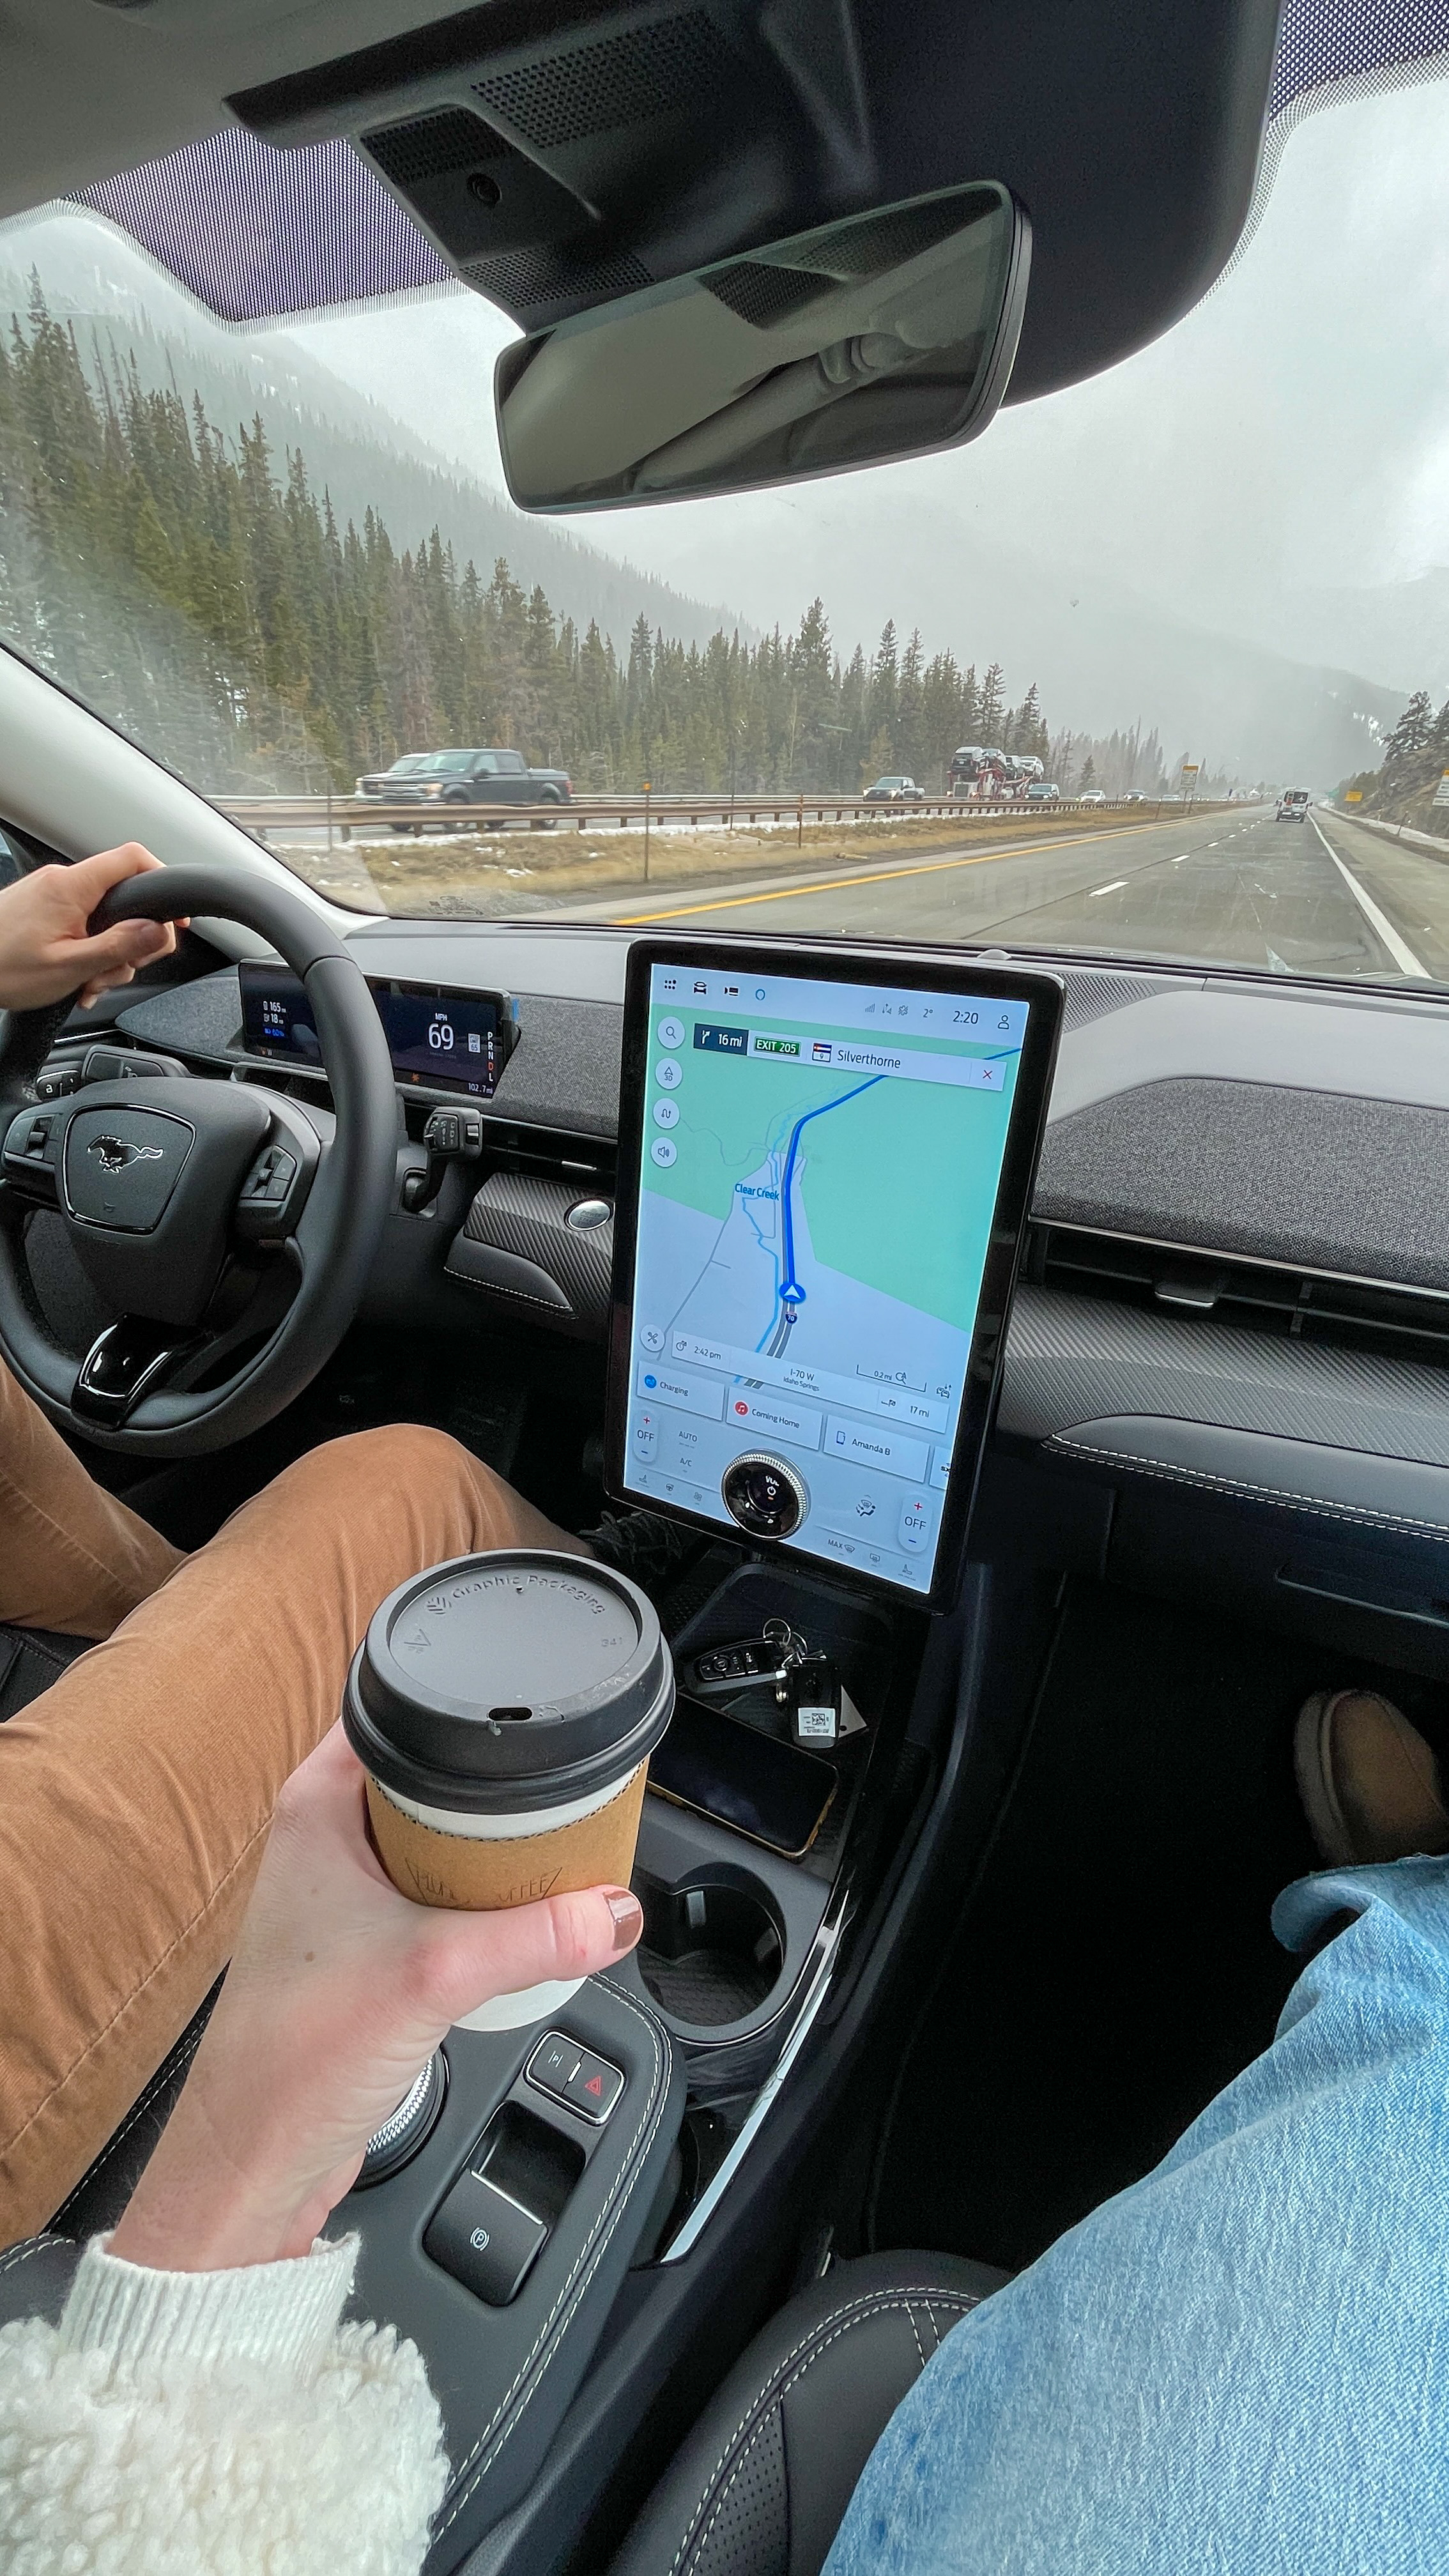 Amanda Bittner holds a coffee in the passenger seat as her travel partner drives the EV. The sky is overcast.